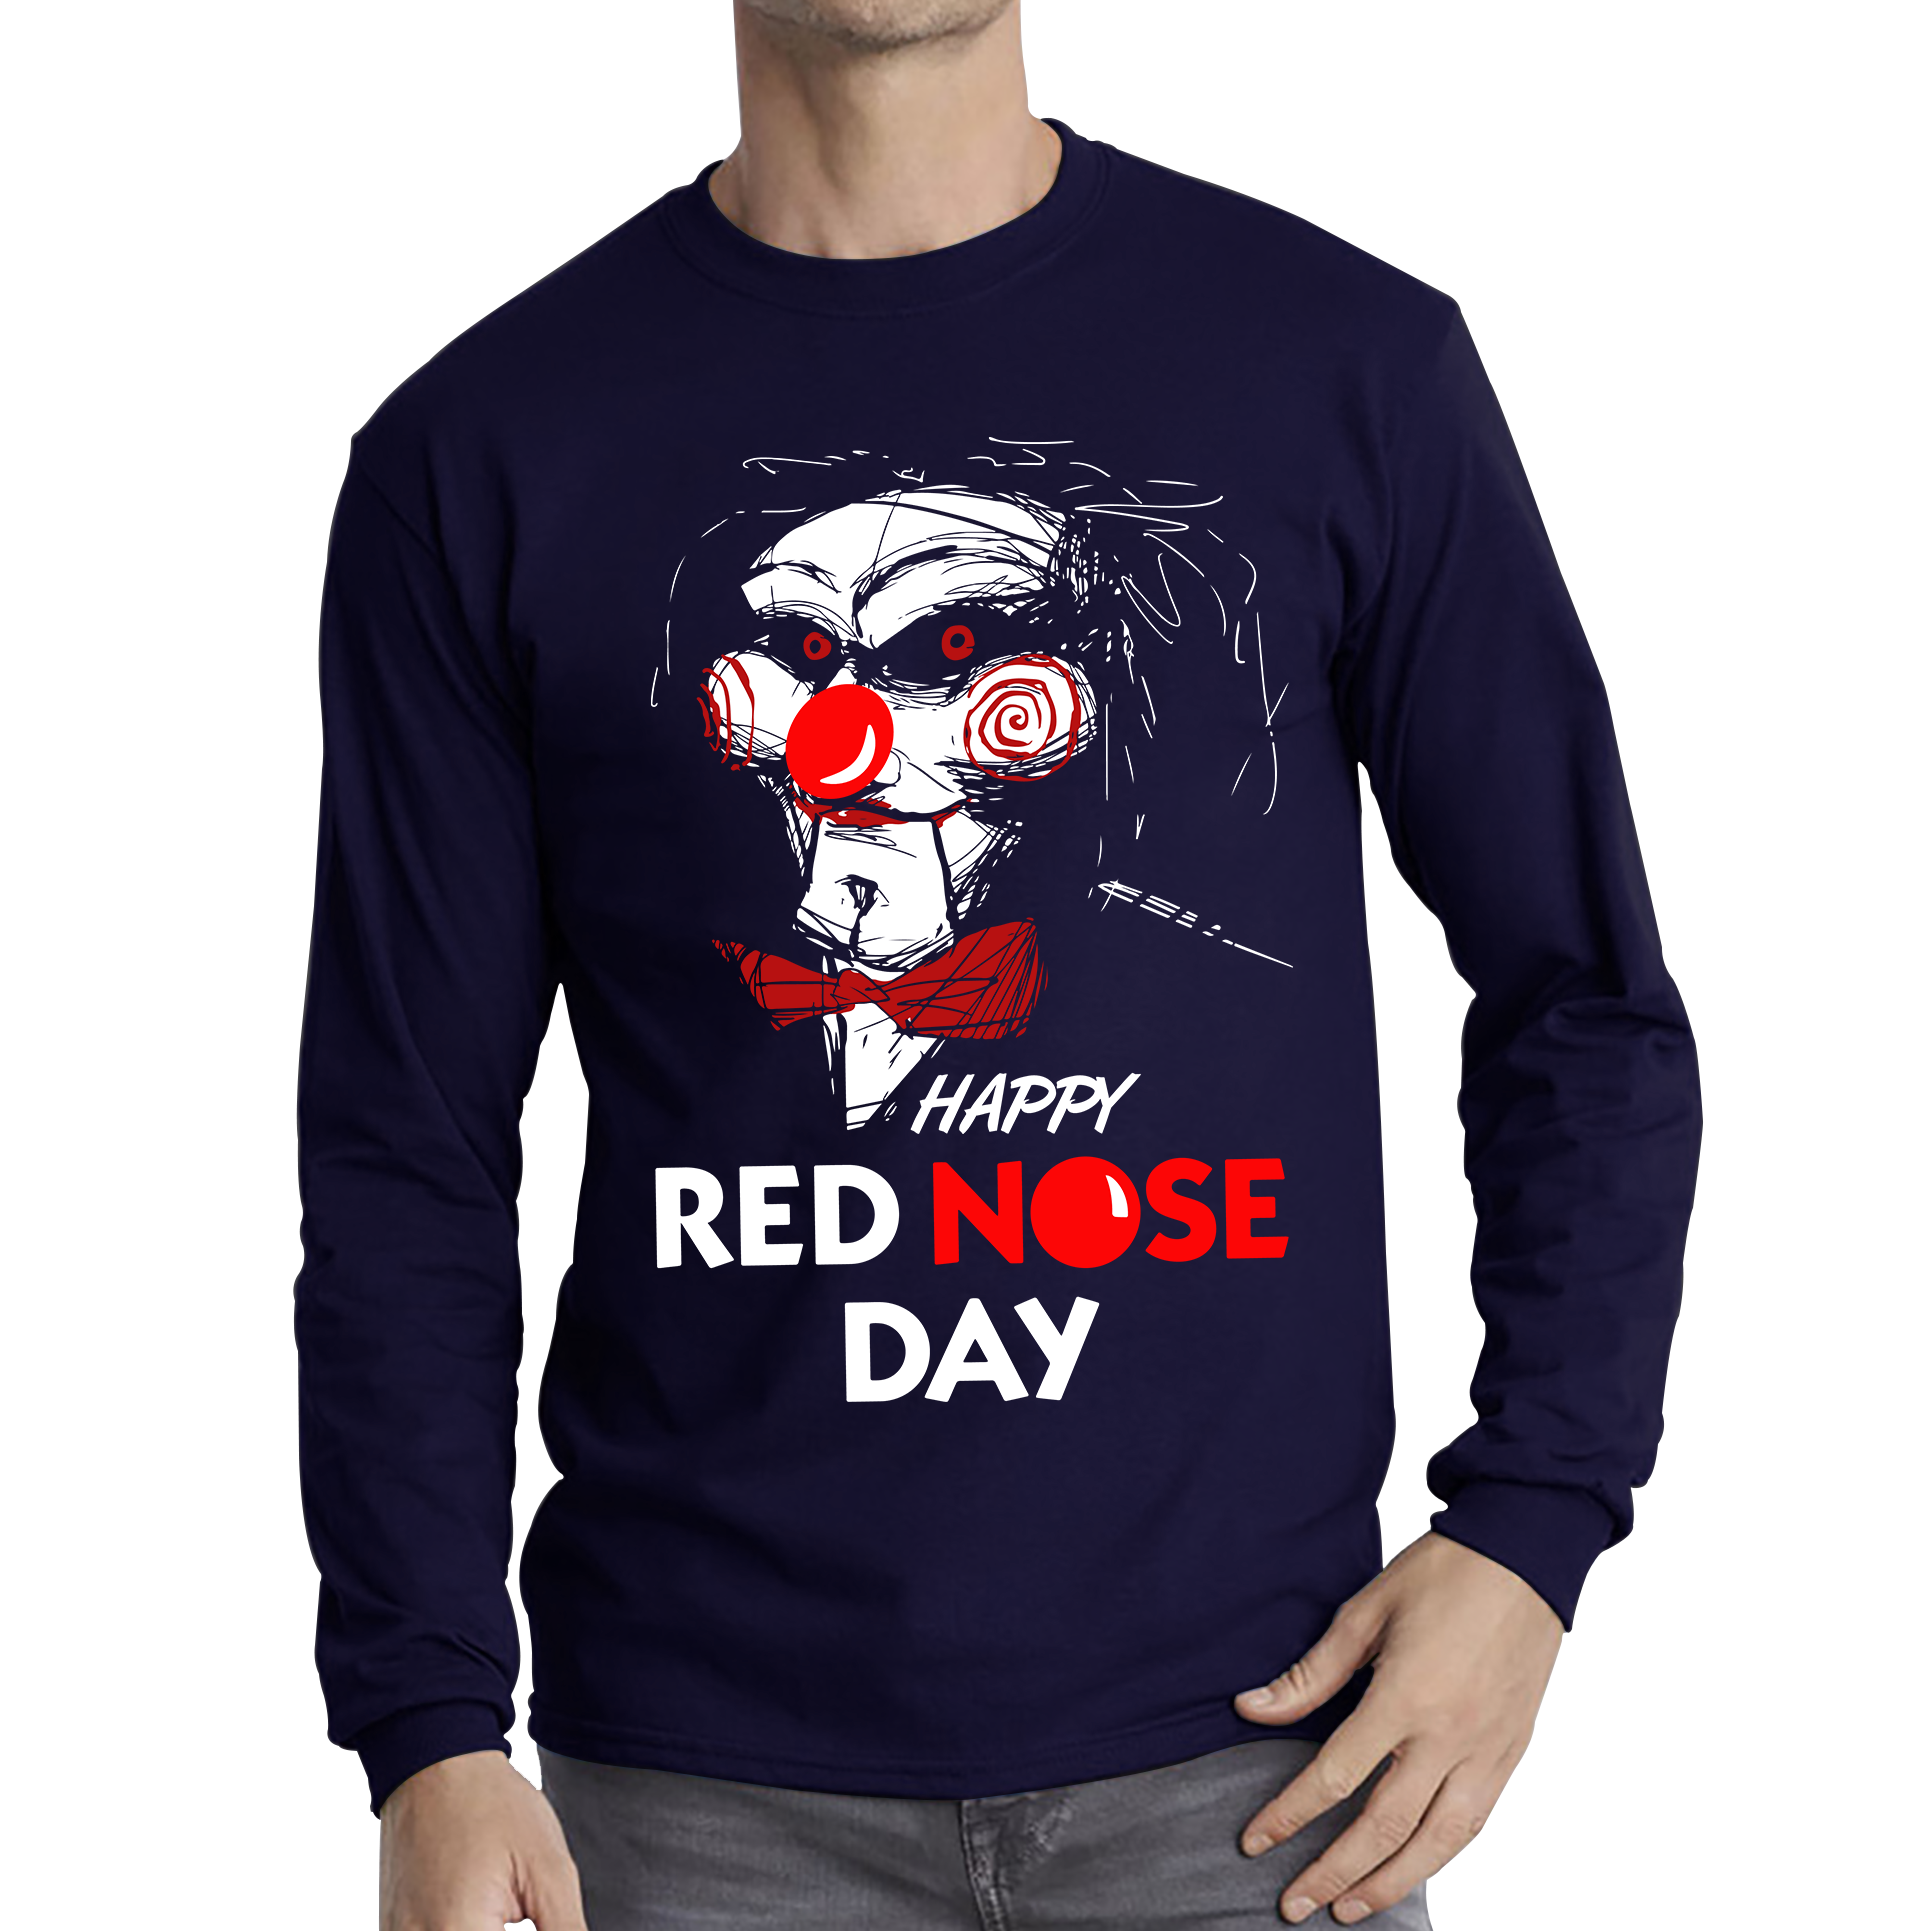 Jigsaw Happy Red Nose Day Adult Long Sleeve T Shirt. 50% Goes To Charity